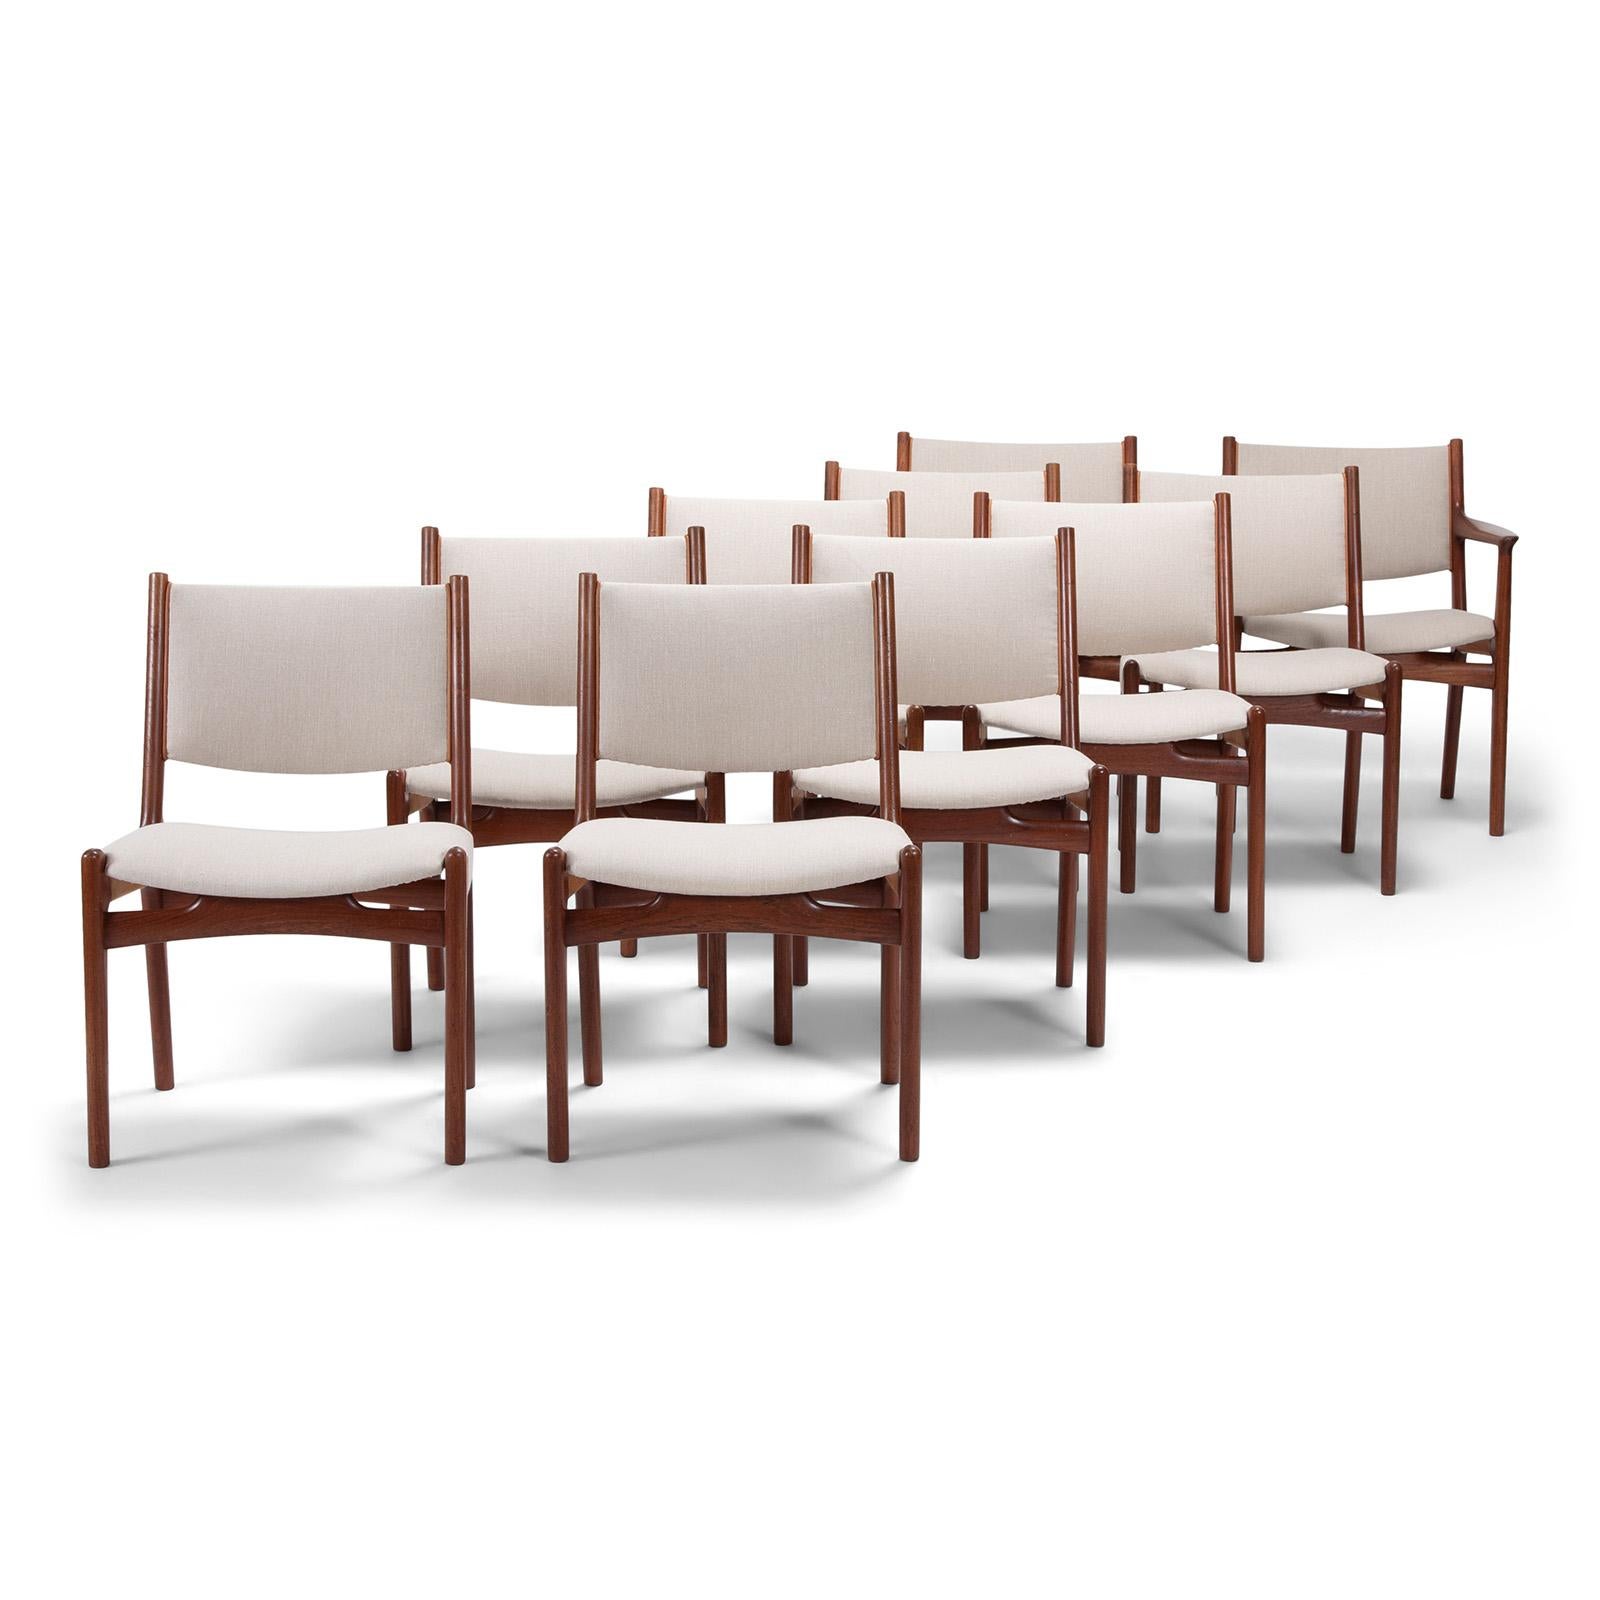 Hand-Crafted Set of 10 Chairs by Hans Wegner, Made by Cabinetmaker Johannes Hansen For Sale